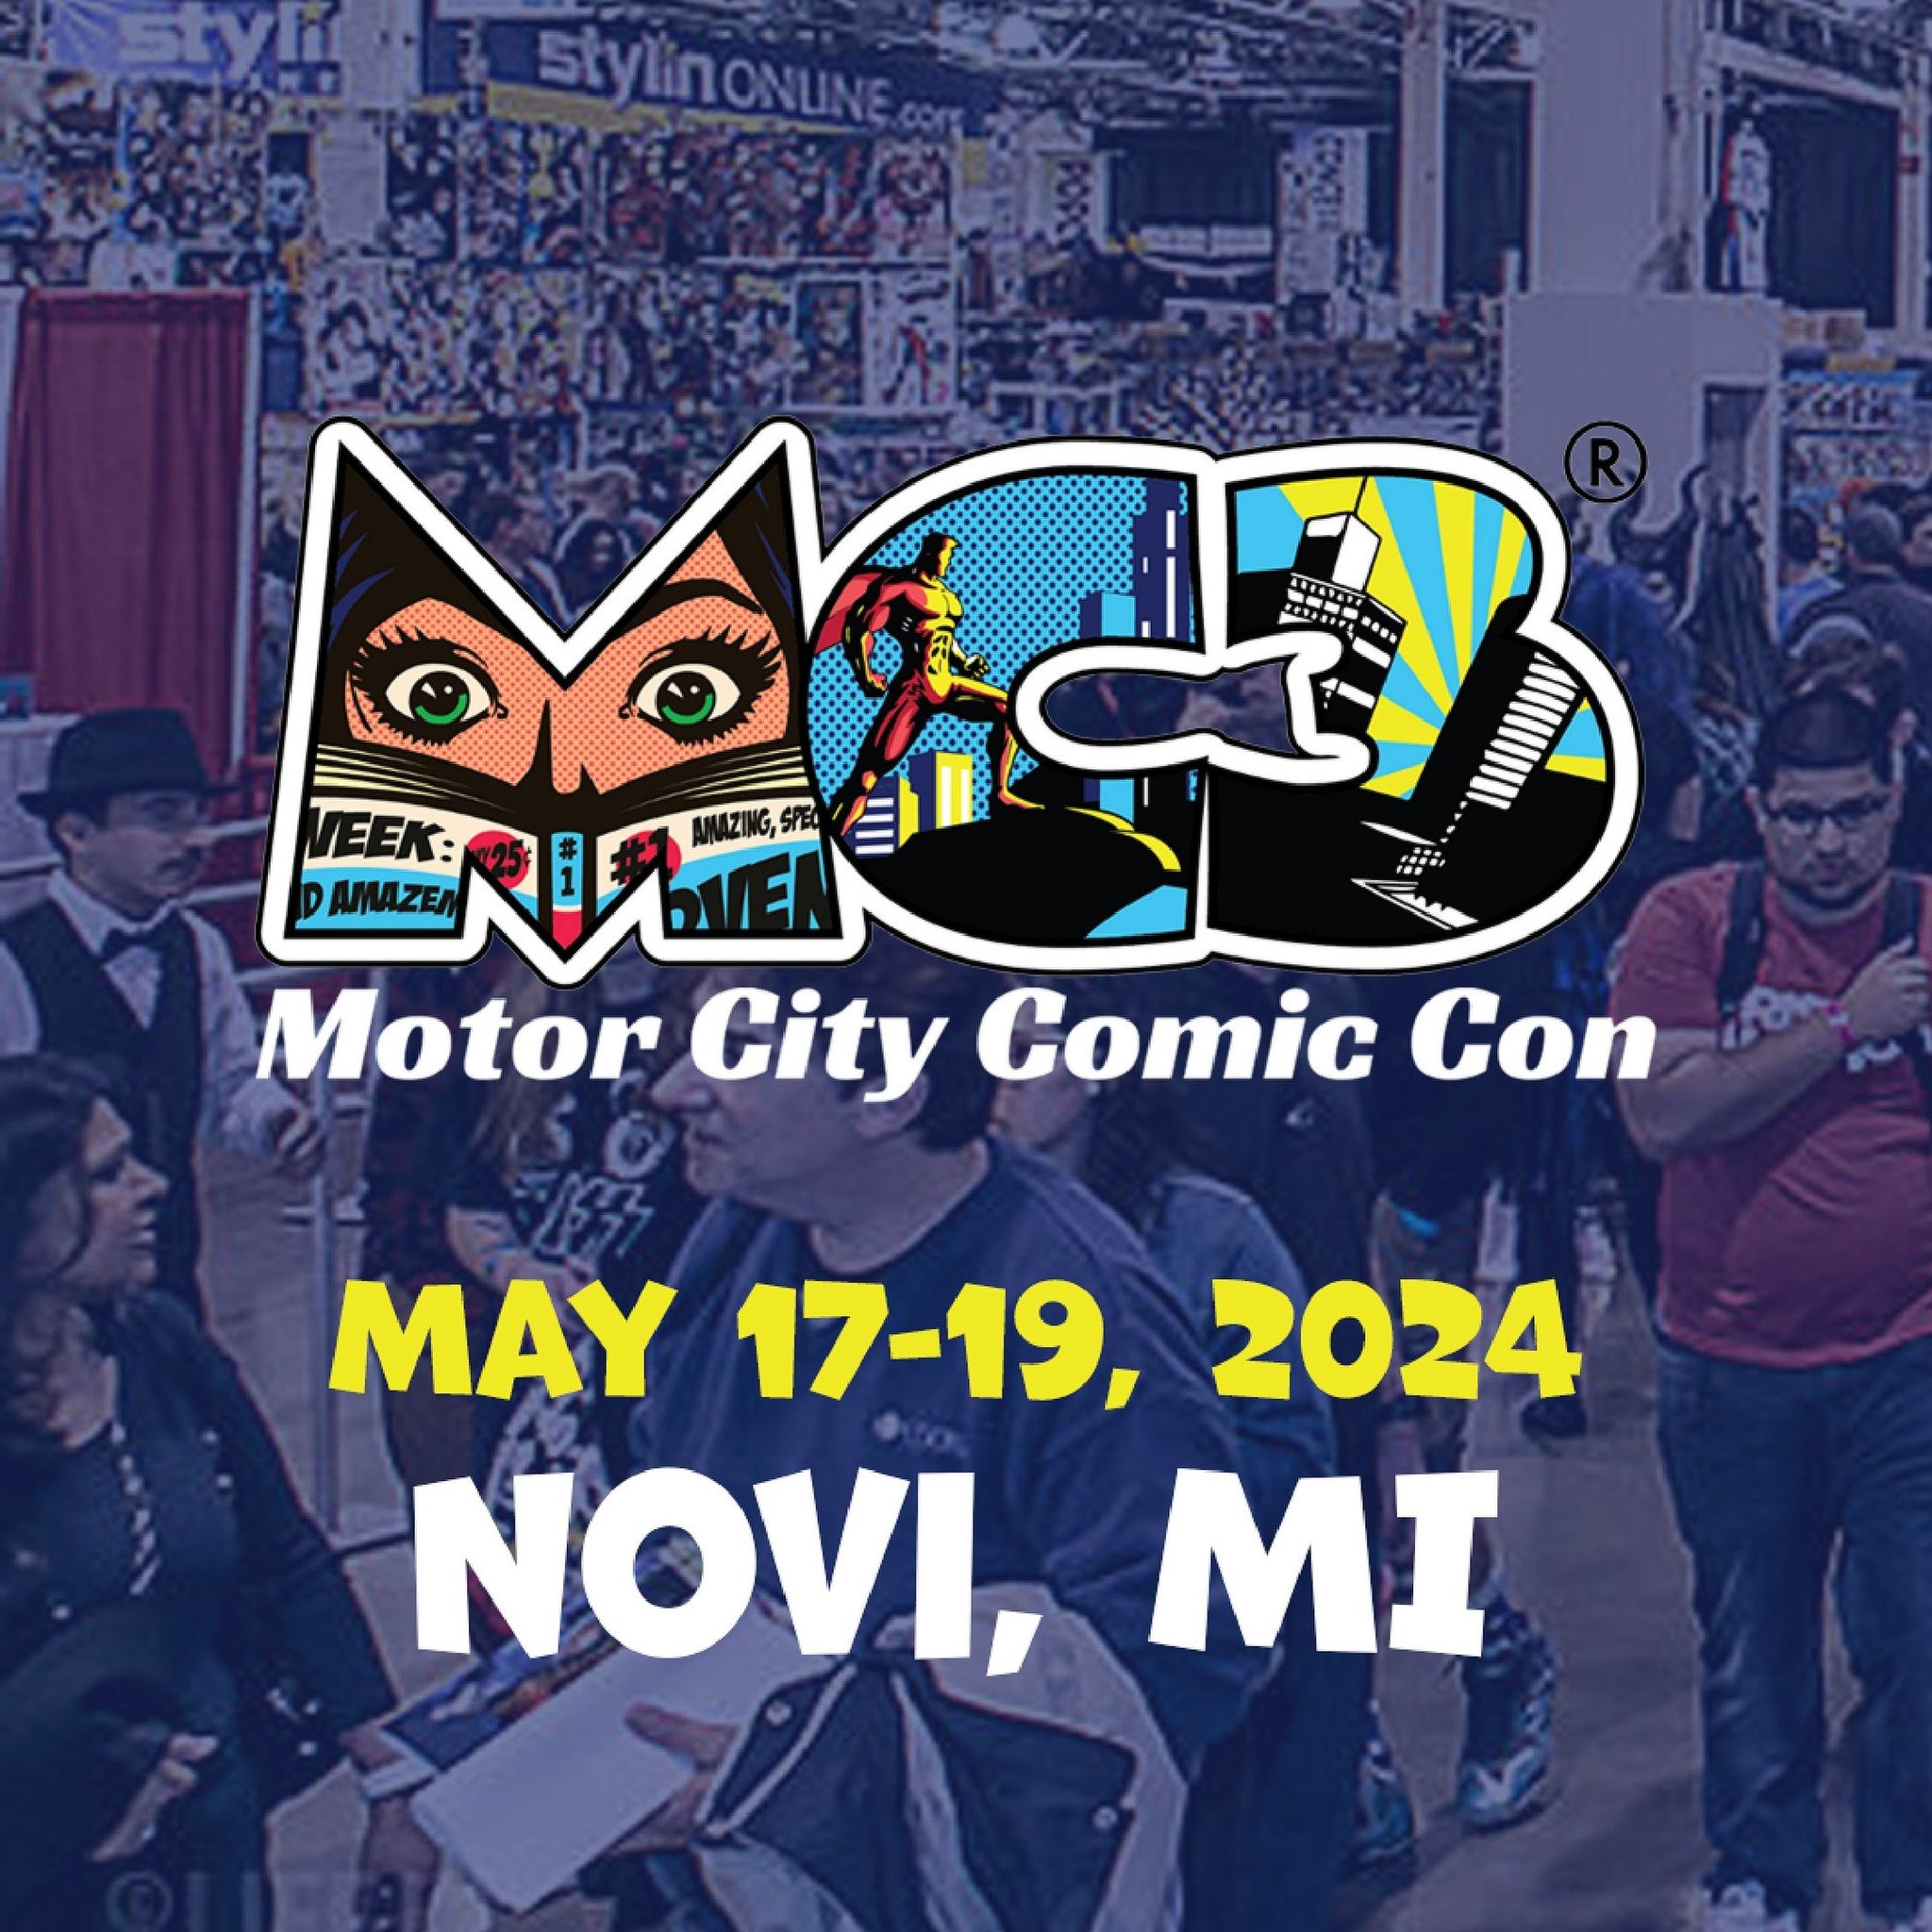 @motcitycomiccon is only 7 days away!!
May 17-19, 2024

Solid lineup of celeb guests!

@helenhunt 
@williamshatner 
@tomkennyandthehiseas 
@imheathergraham 
@erniehudsonofficial 
@cobiesmulders 
@jennifermorrison 
@gates_mcfadden 
@thebill 
@therealv